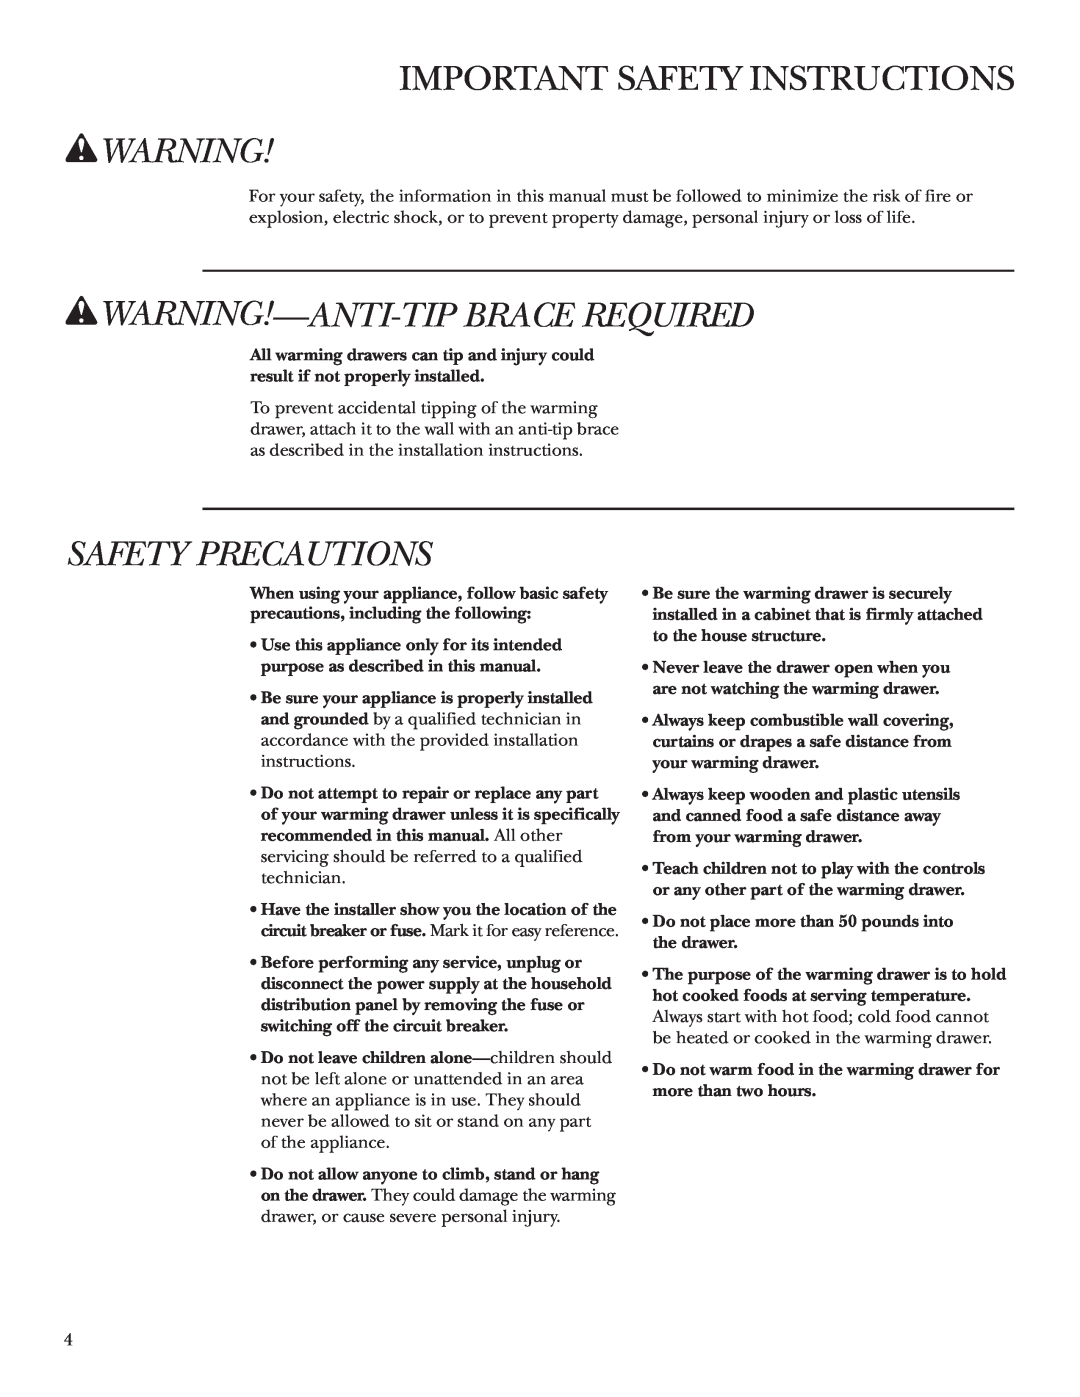 GE ZKD910 owner manual Important Safety Instructions, wWARNING!—ANTI-TIPBRACE REQUIRED, Safety Precautions 